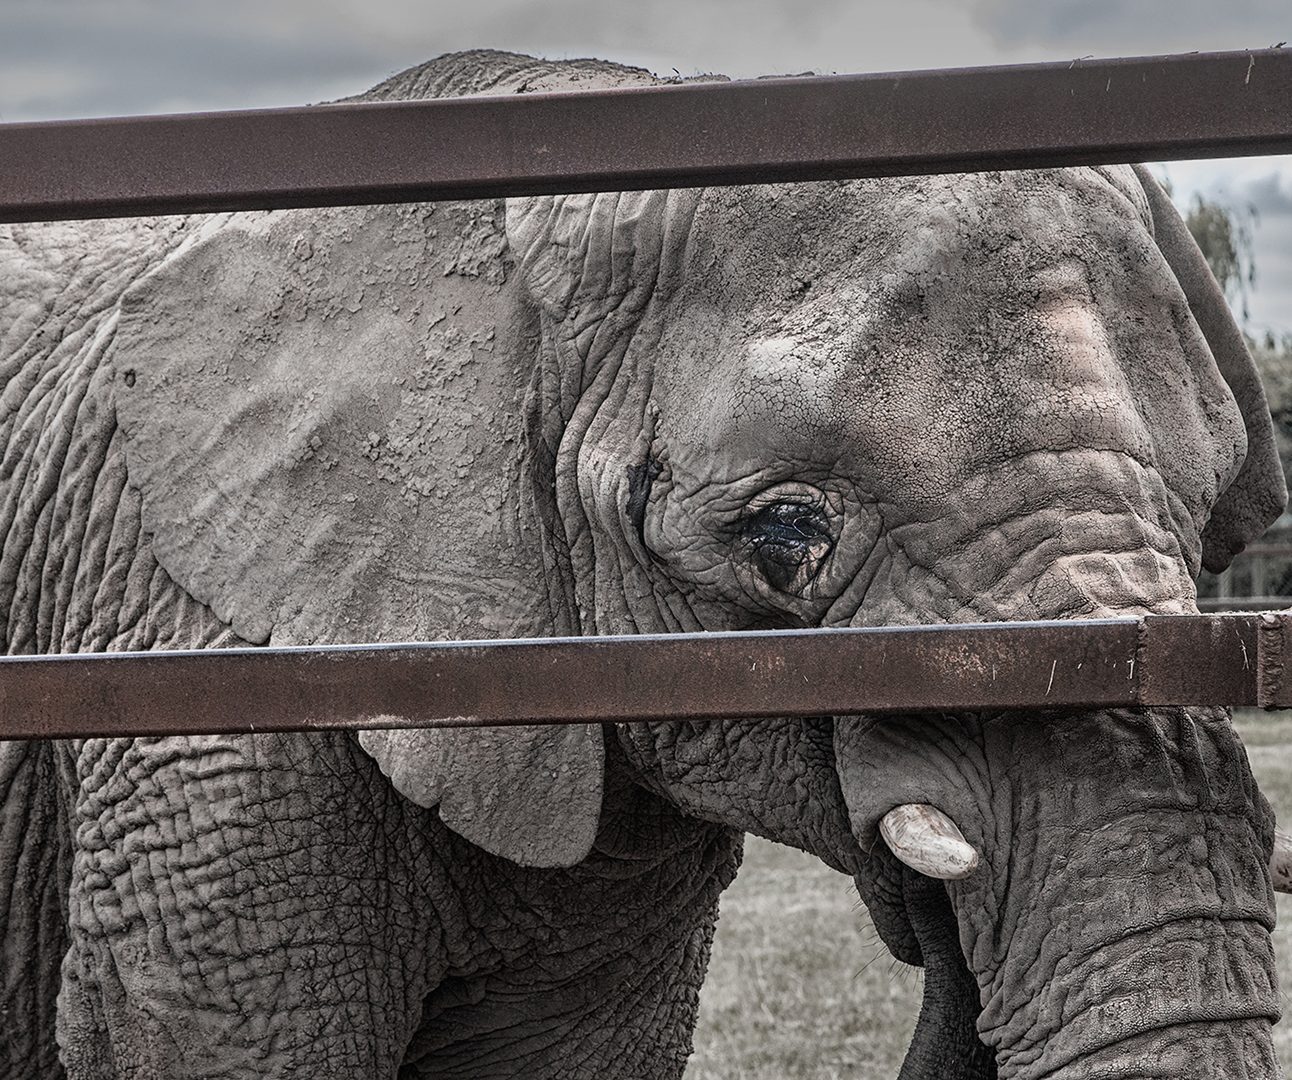 Close up of an elephant looking through the bars of a zoo enclosure